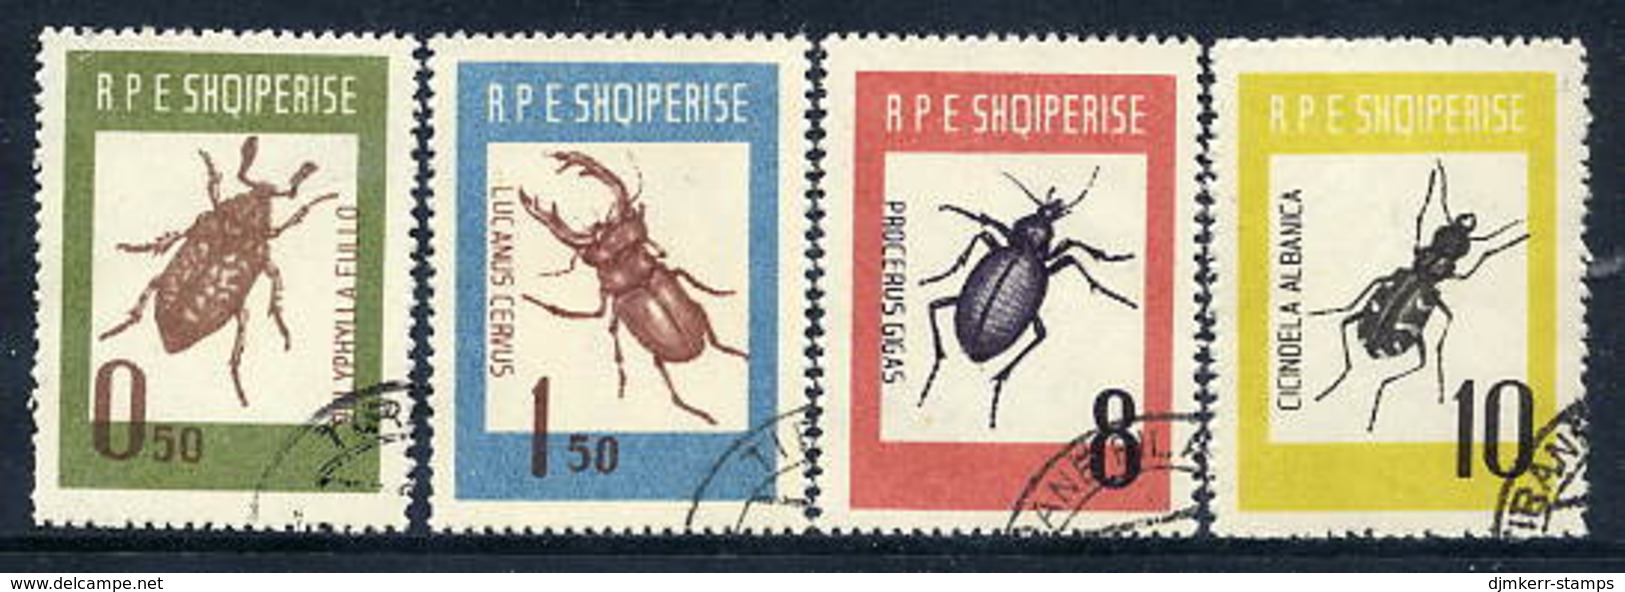 ALBANIA 1963 Insects Set Used.  Michel 735-38 - Albanie